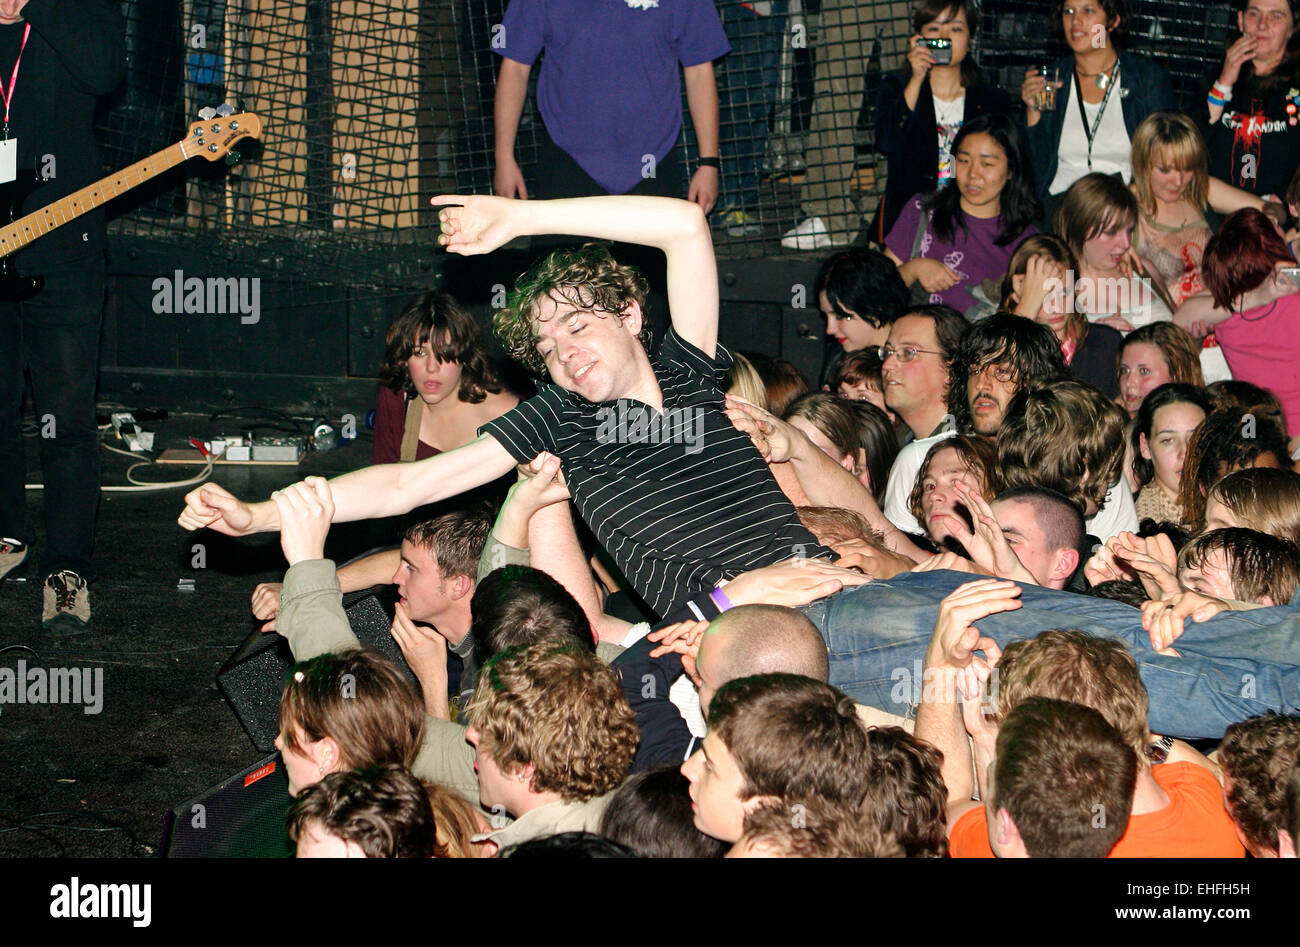 Lead singer from The Others crowd surfing at Club NME at Koko in Camden London. Stock Photo